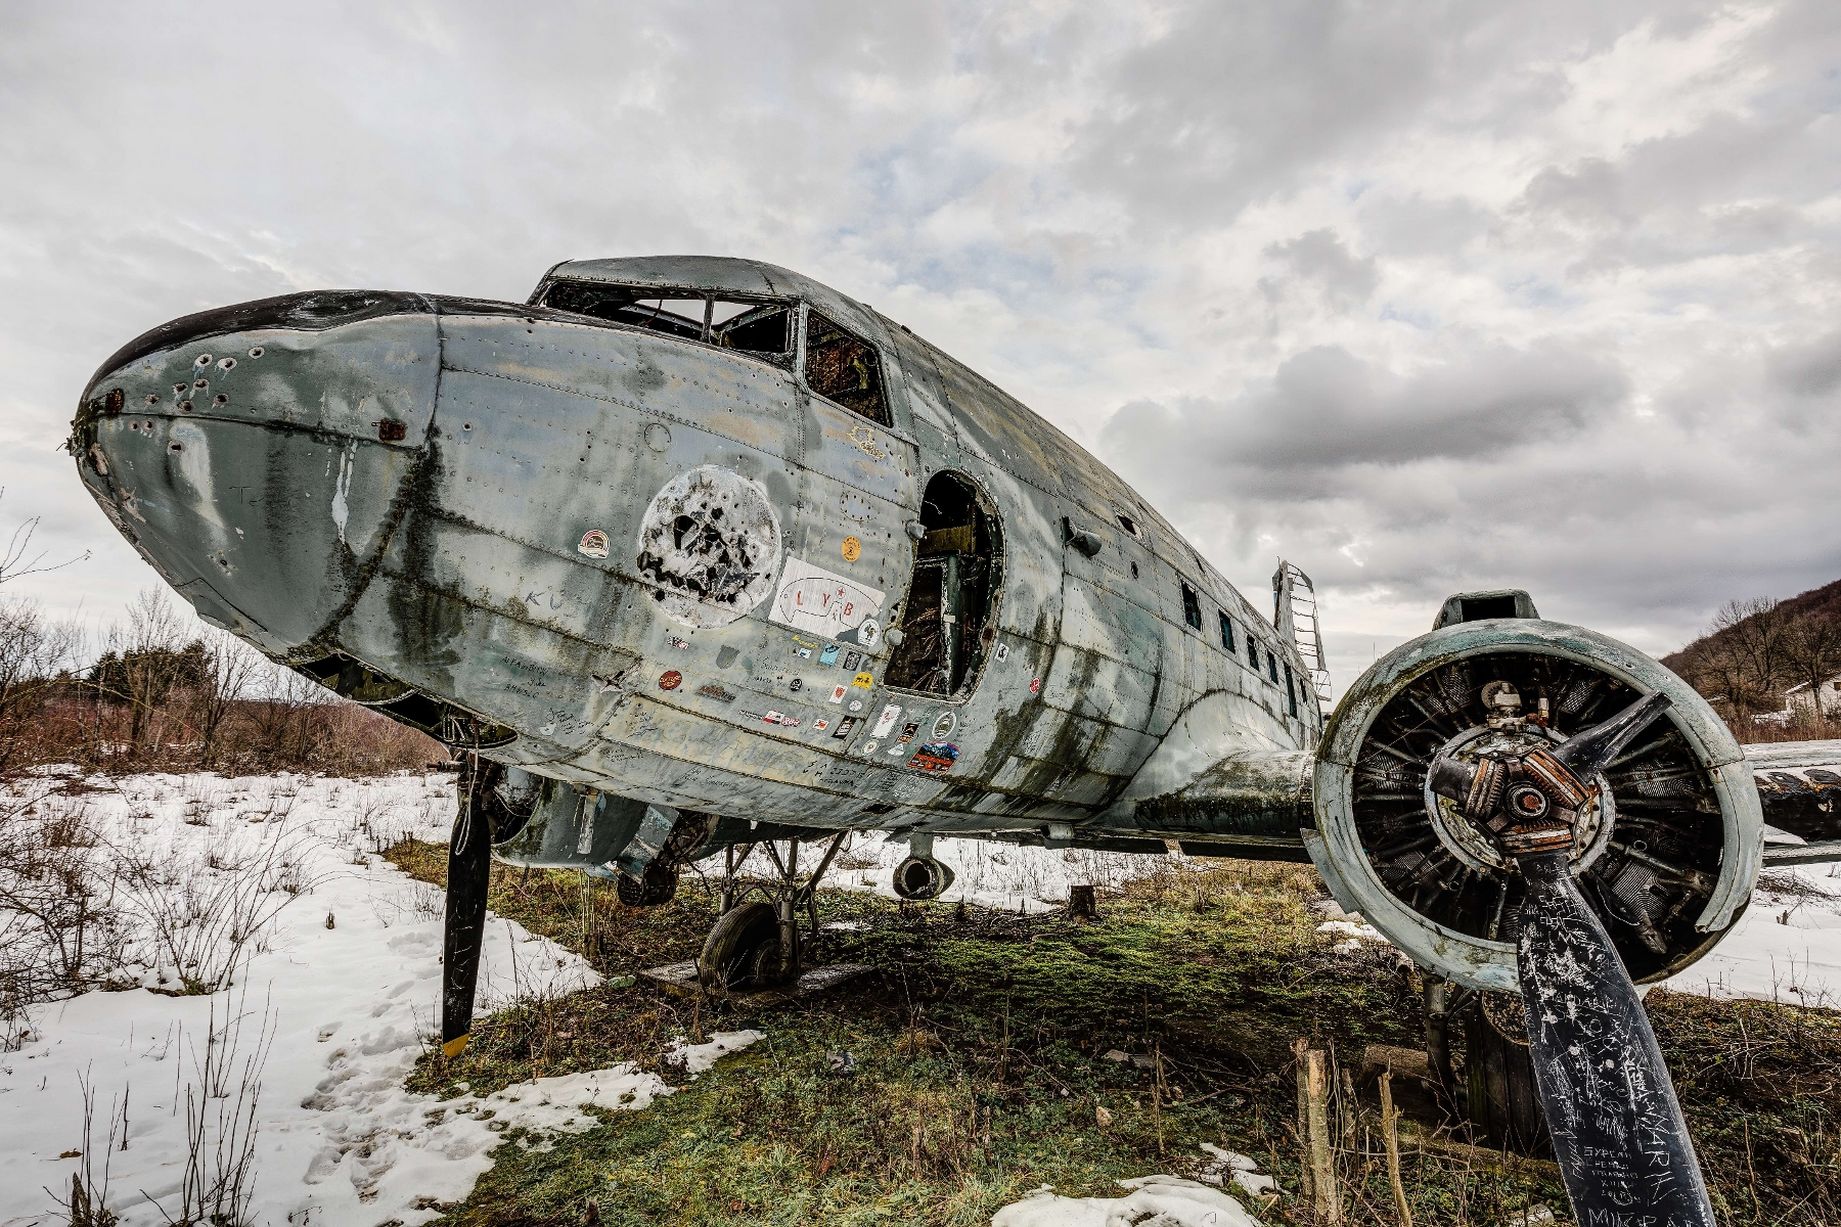 A military plane has been left to rust at the former air base which was destroyed in the war in 1992